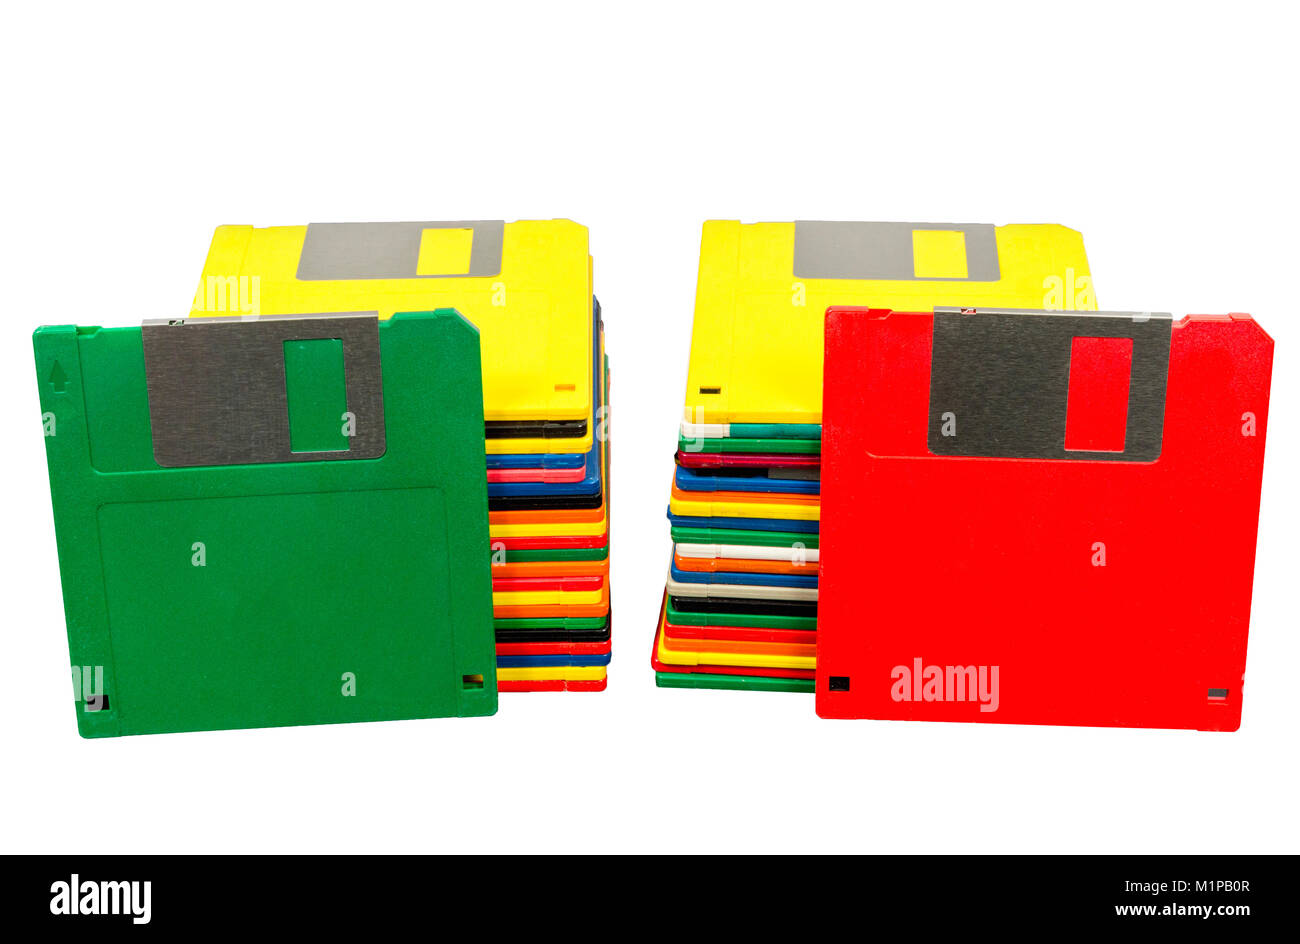 Horizontal shot of two stacks of old plastic multicolored disks.  A green disk is leaning against one stack and a red disk against the other.  Fronts  Stock Photo